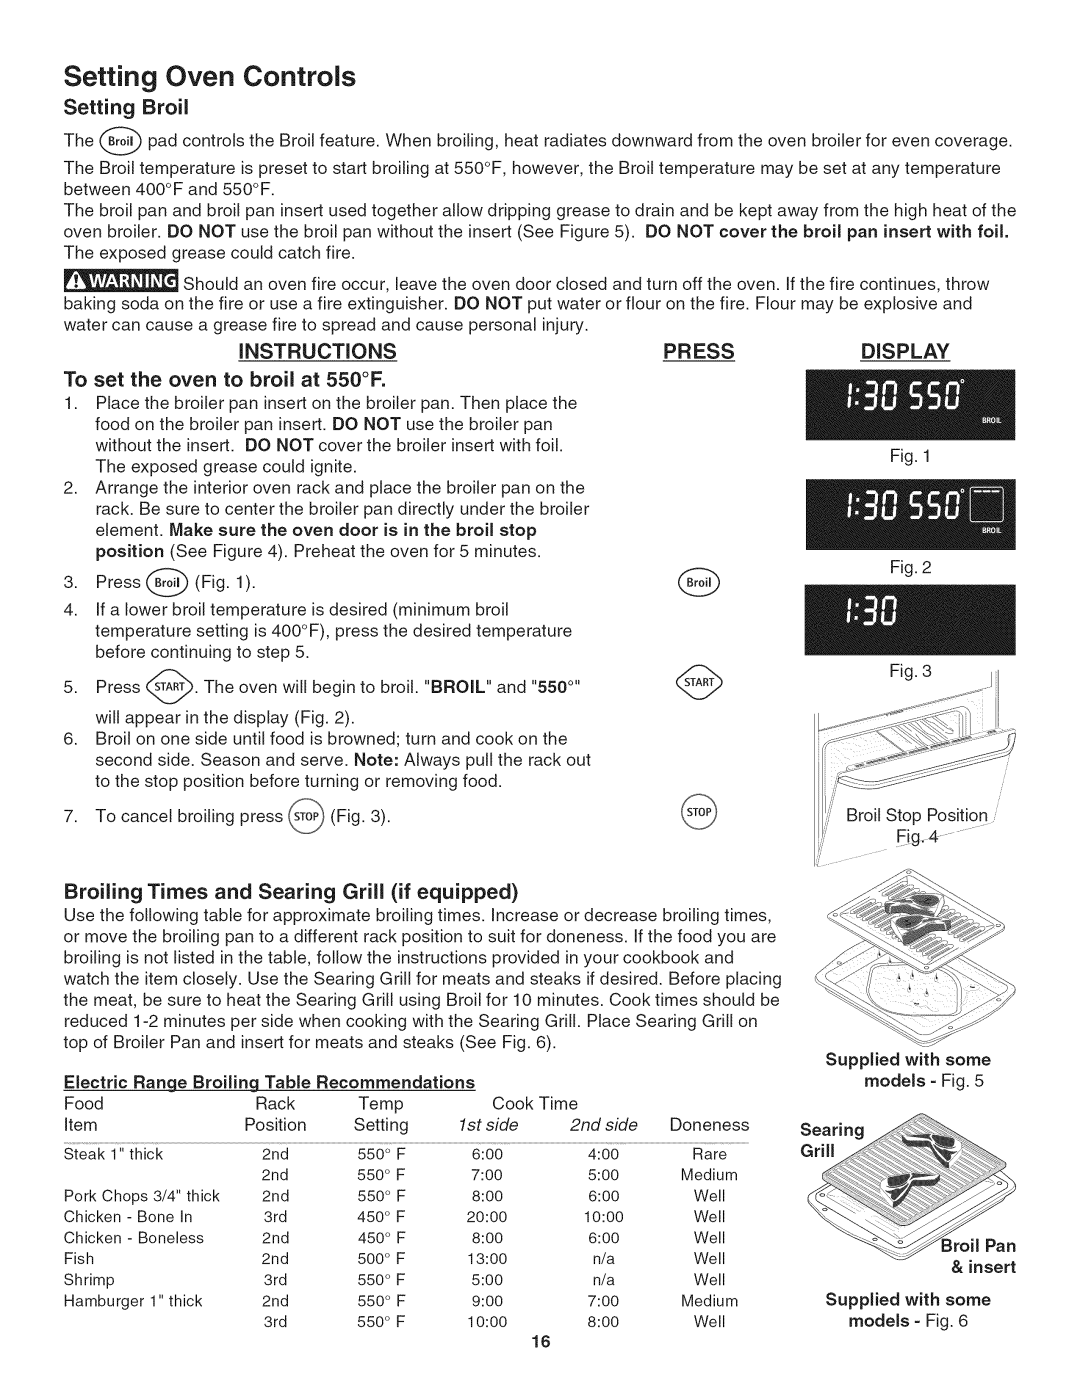 Kenmore 790.4802 Setting Oven, Controls, Broil, INSTRUCTIONS To set the oven to broil at 550F, Pressdisplay, 1st side 